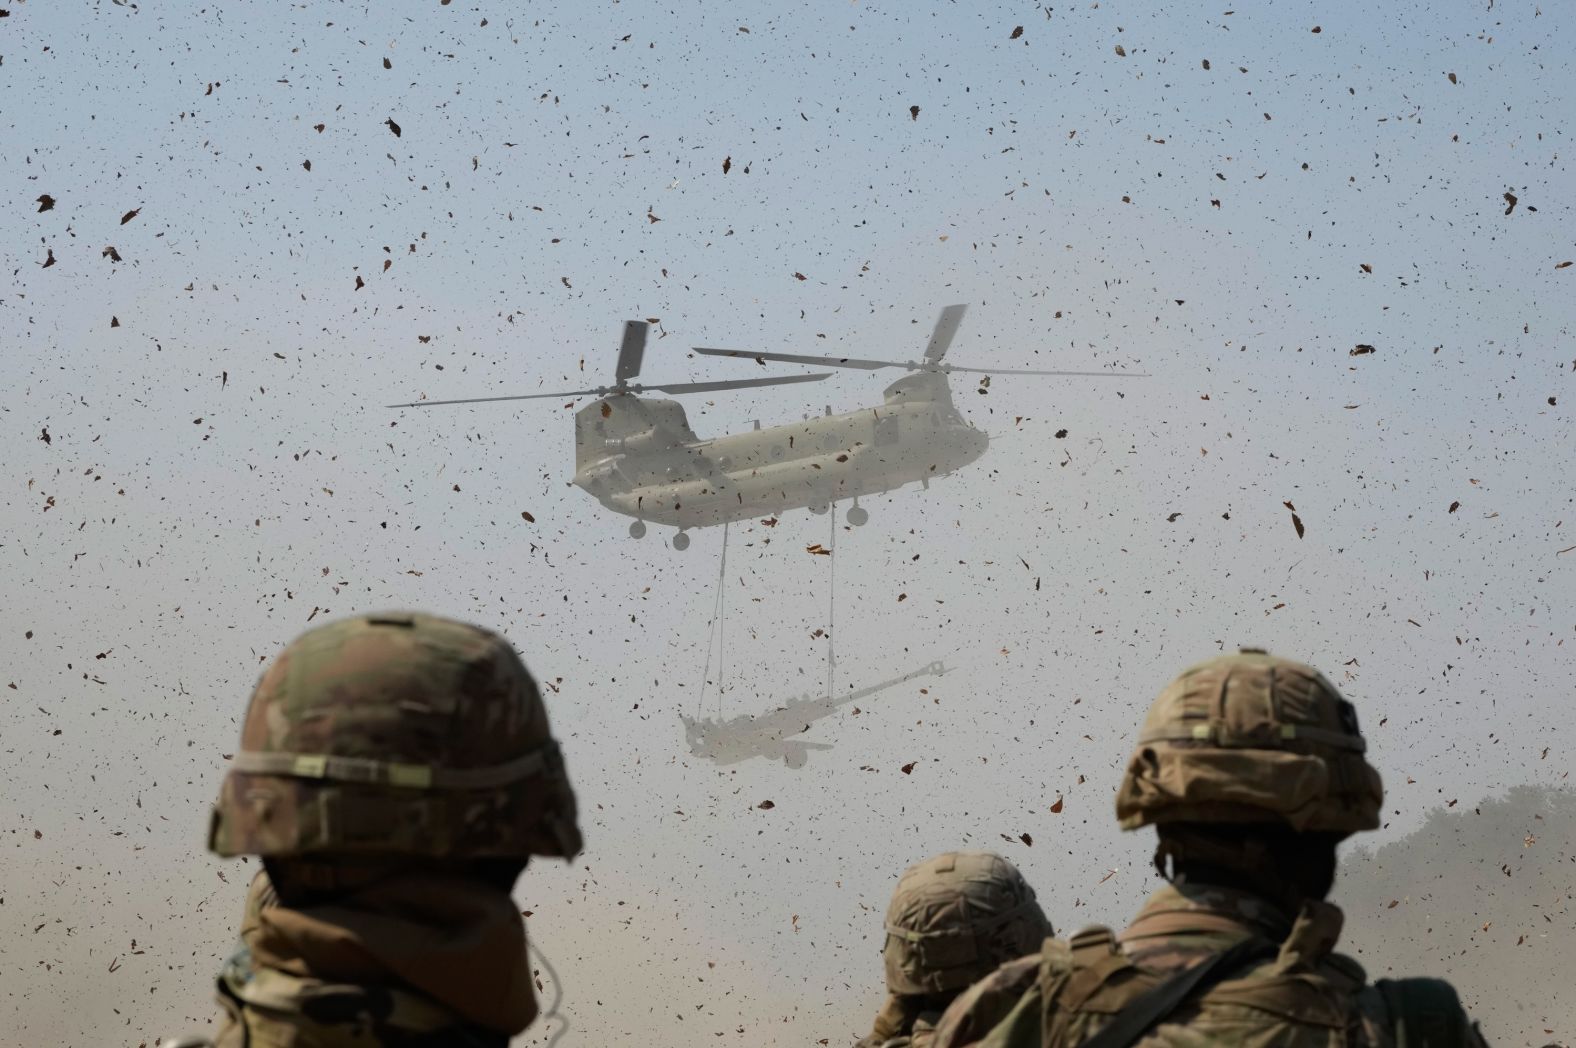 A US Army helicopter transports a howitzer during a <a href="index.php?page=&url=https%3A%2F%2Fwww.cnn.com%2F2023%2F03%2F18%2Fasia%2Fnorth-korea-ballistic-missile-launch-19-march-intl-hnk%2Findex.html" target="_blank">joint military drill</a> in Pocheon, South Korea, on Sunday, March 19.